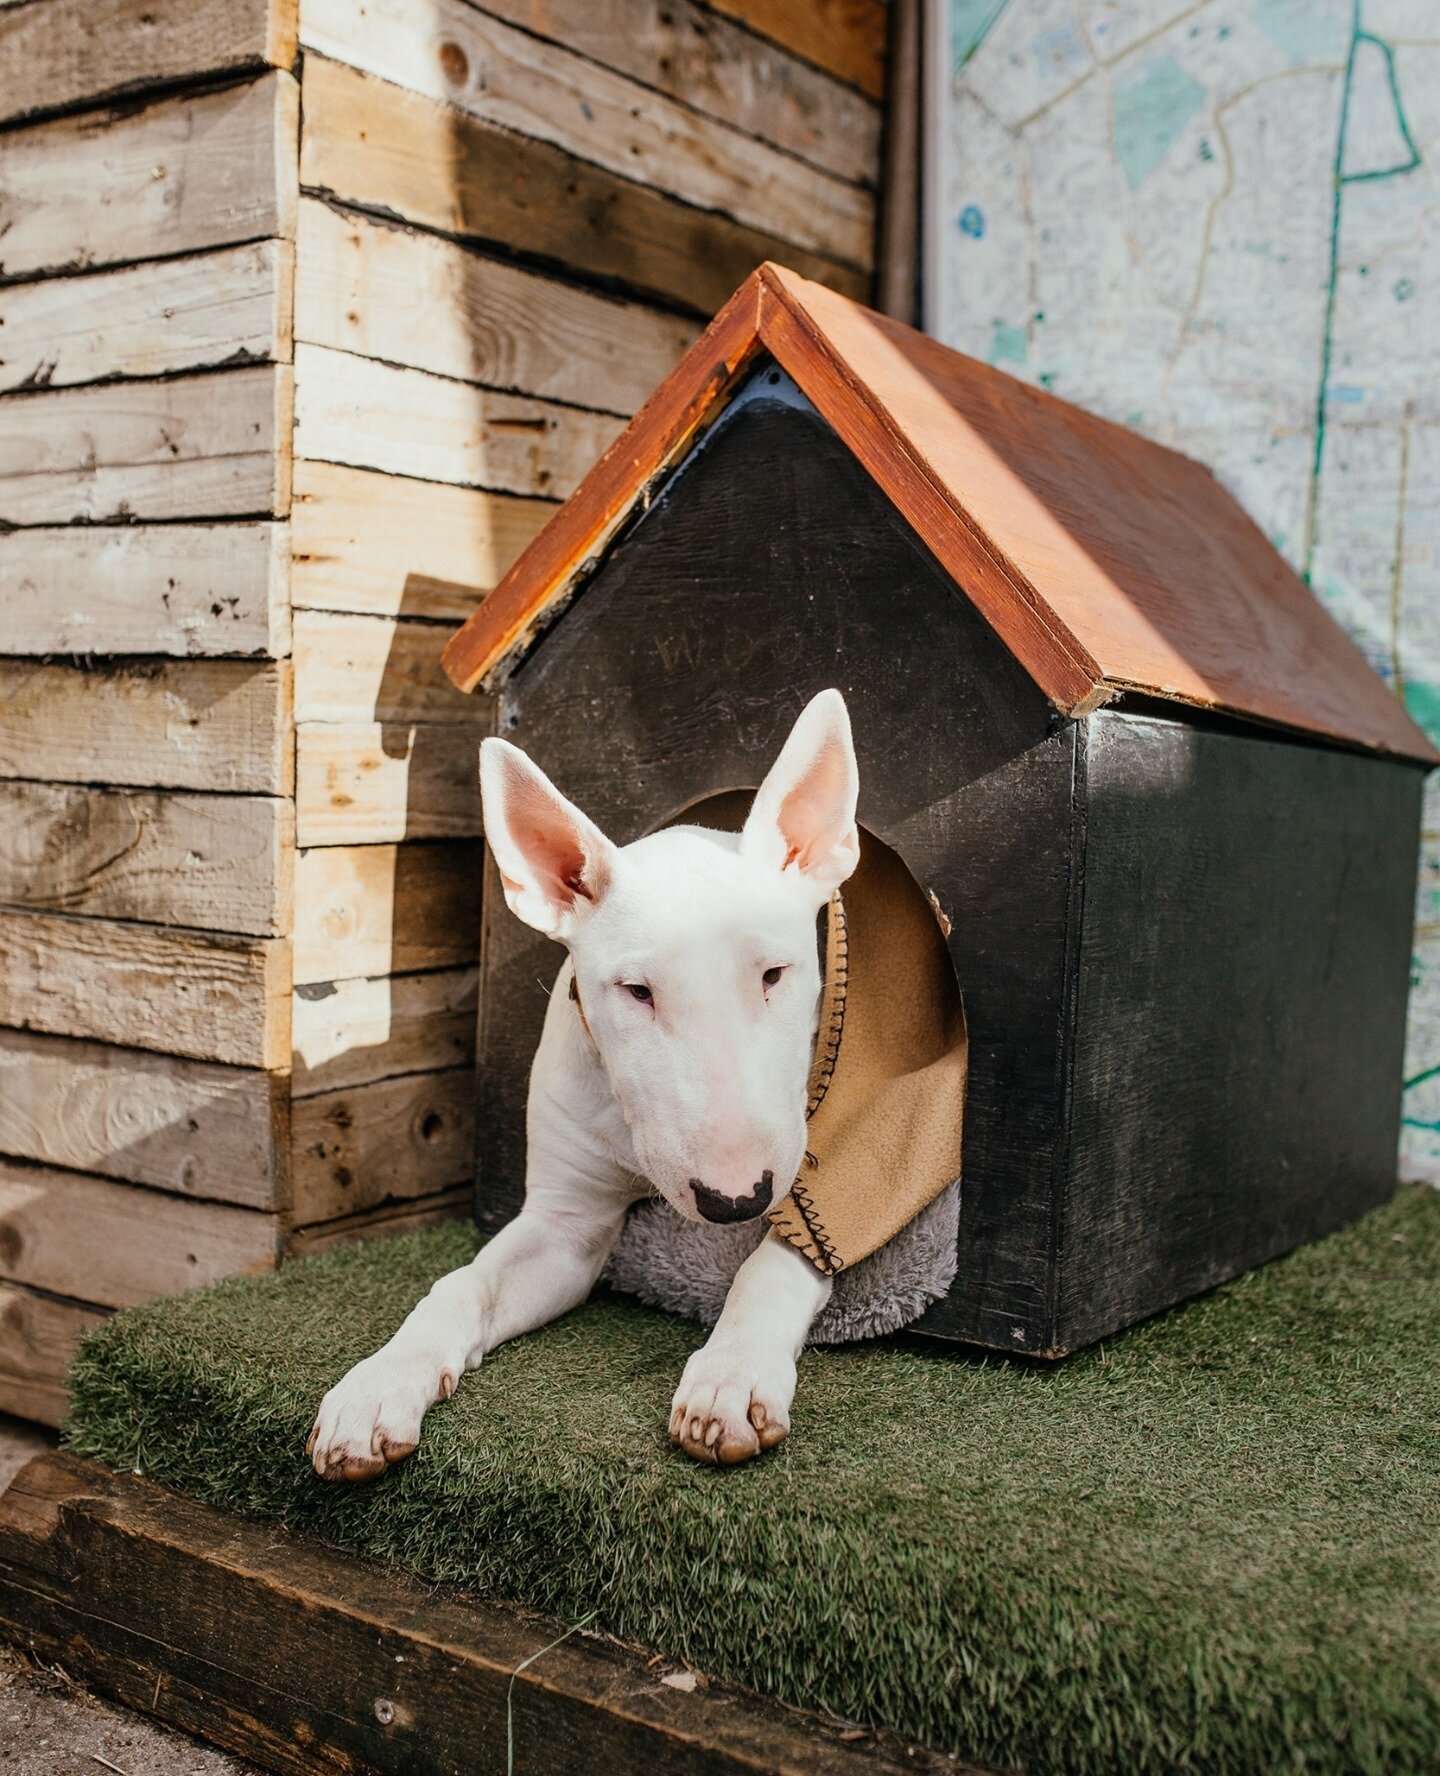 🏡 Does your dog have a safe space at home where they can communicate &quot;I need a break&quot; or &quot;I would like some quite time&quot;?⁠
⁠
If you have other pets or children, your dog may feel sometimes overwhelmed. ⁠
⁠
Or perhaps there are sca